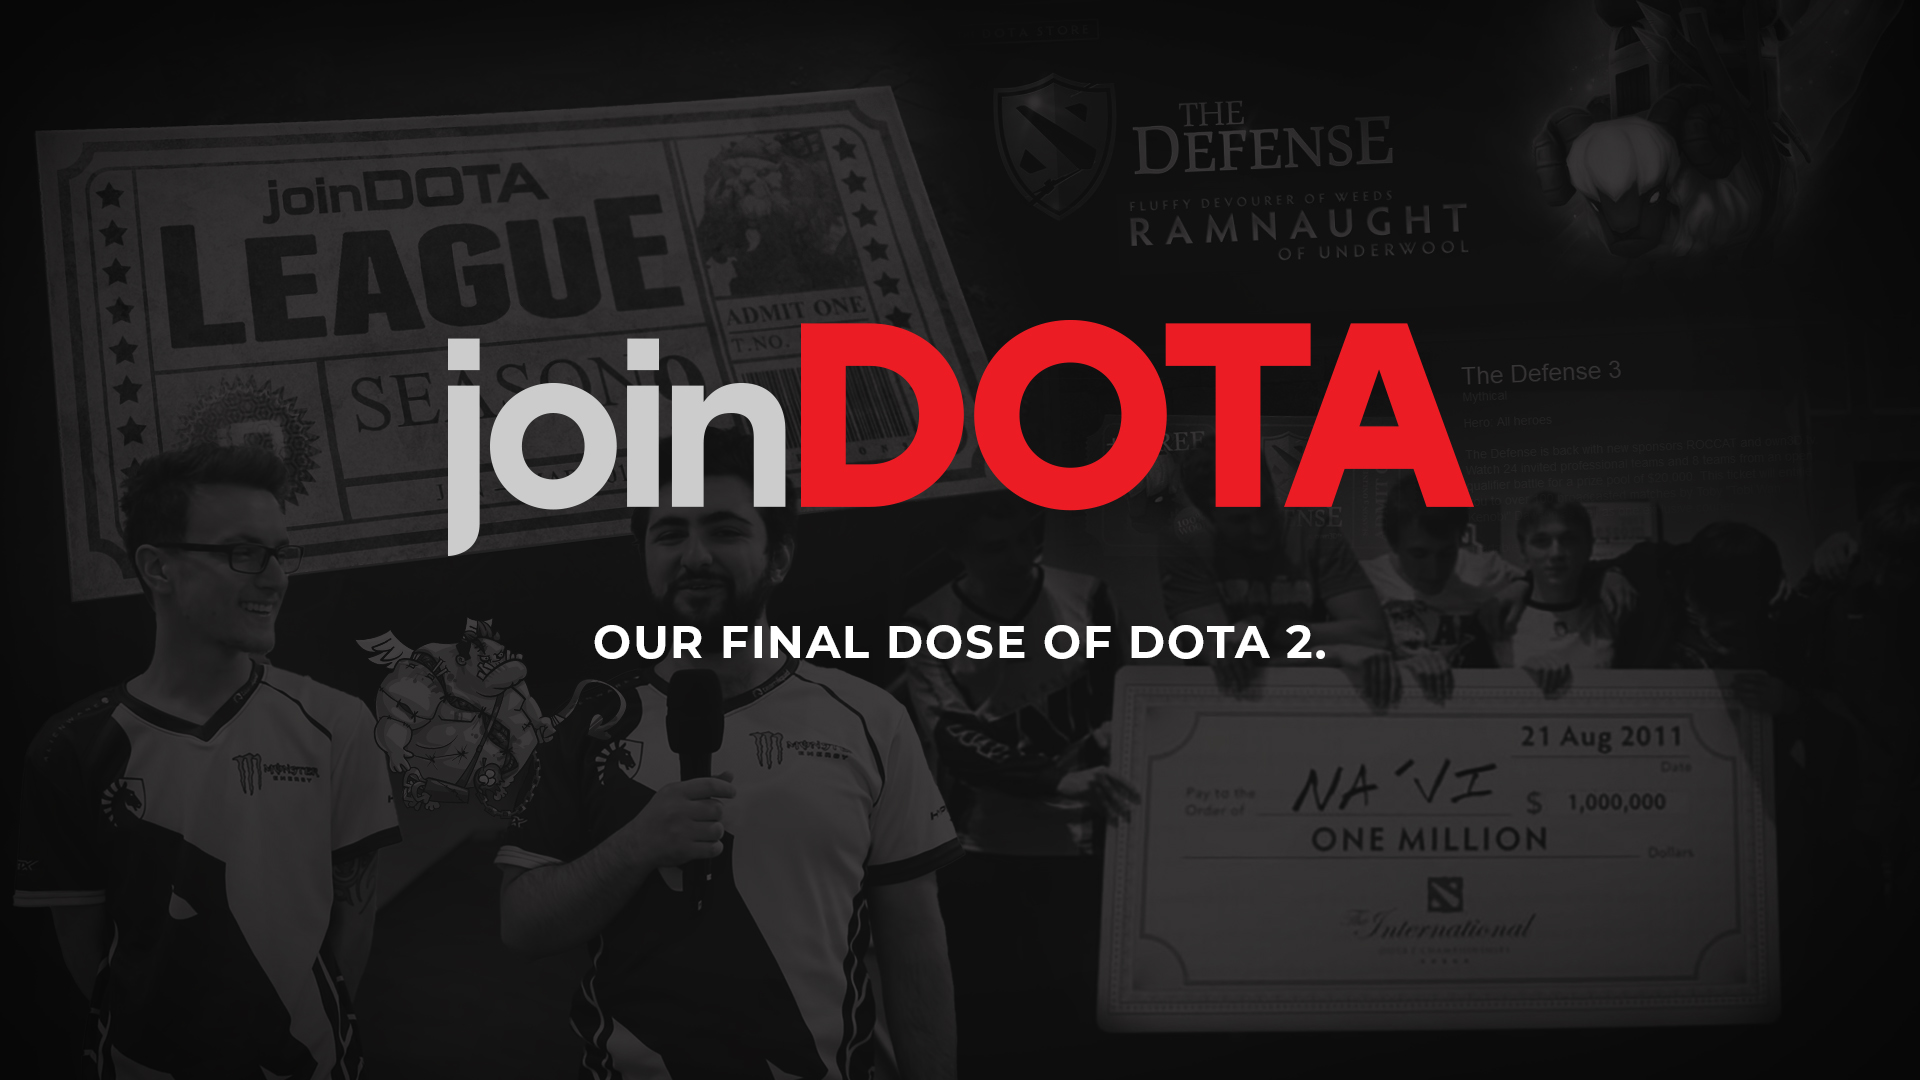 joinDOTA To Stop DOTA 2 Operations From March 31st